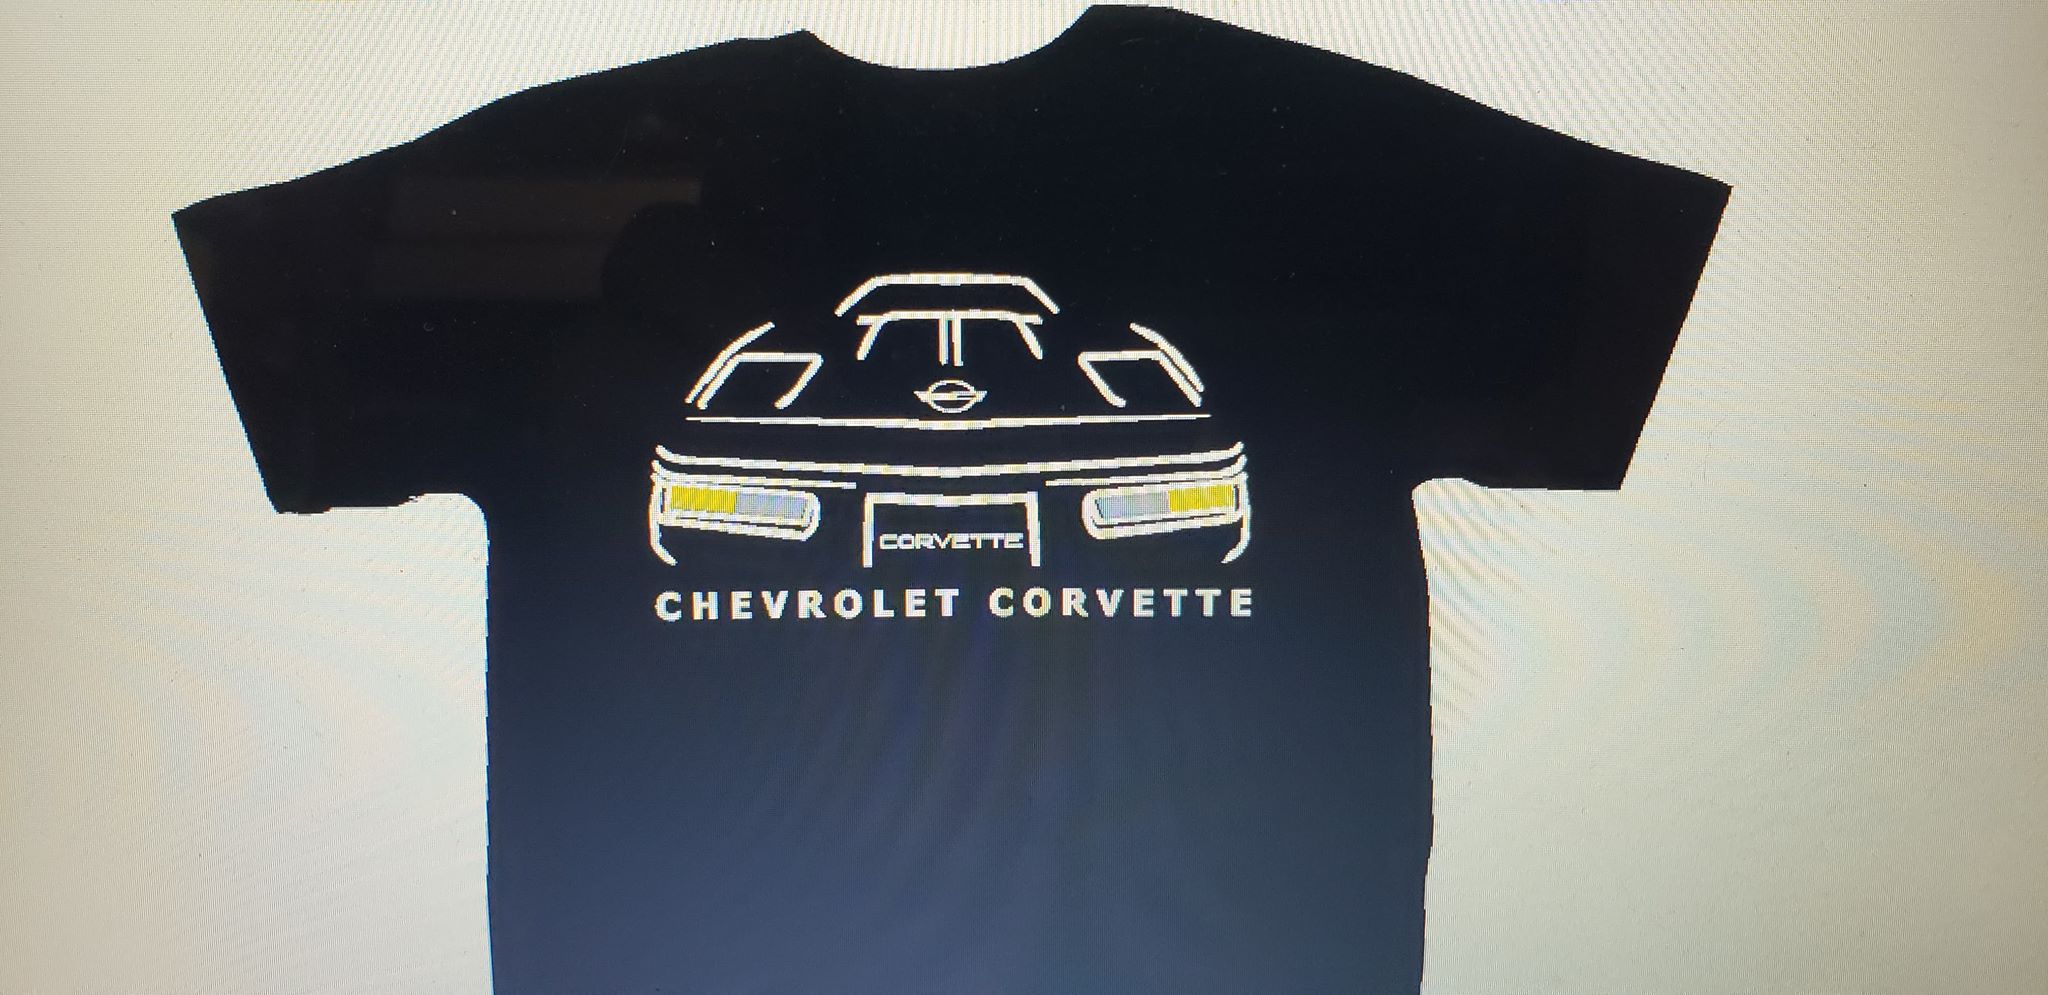 CORVETTE C4 SILHOUETTE T-SHIRT 91-96 FRONT AND BACK PRINT